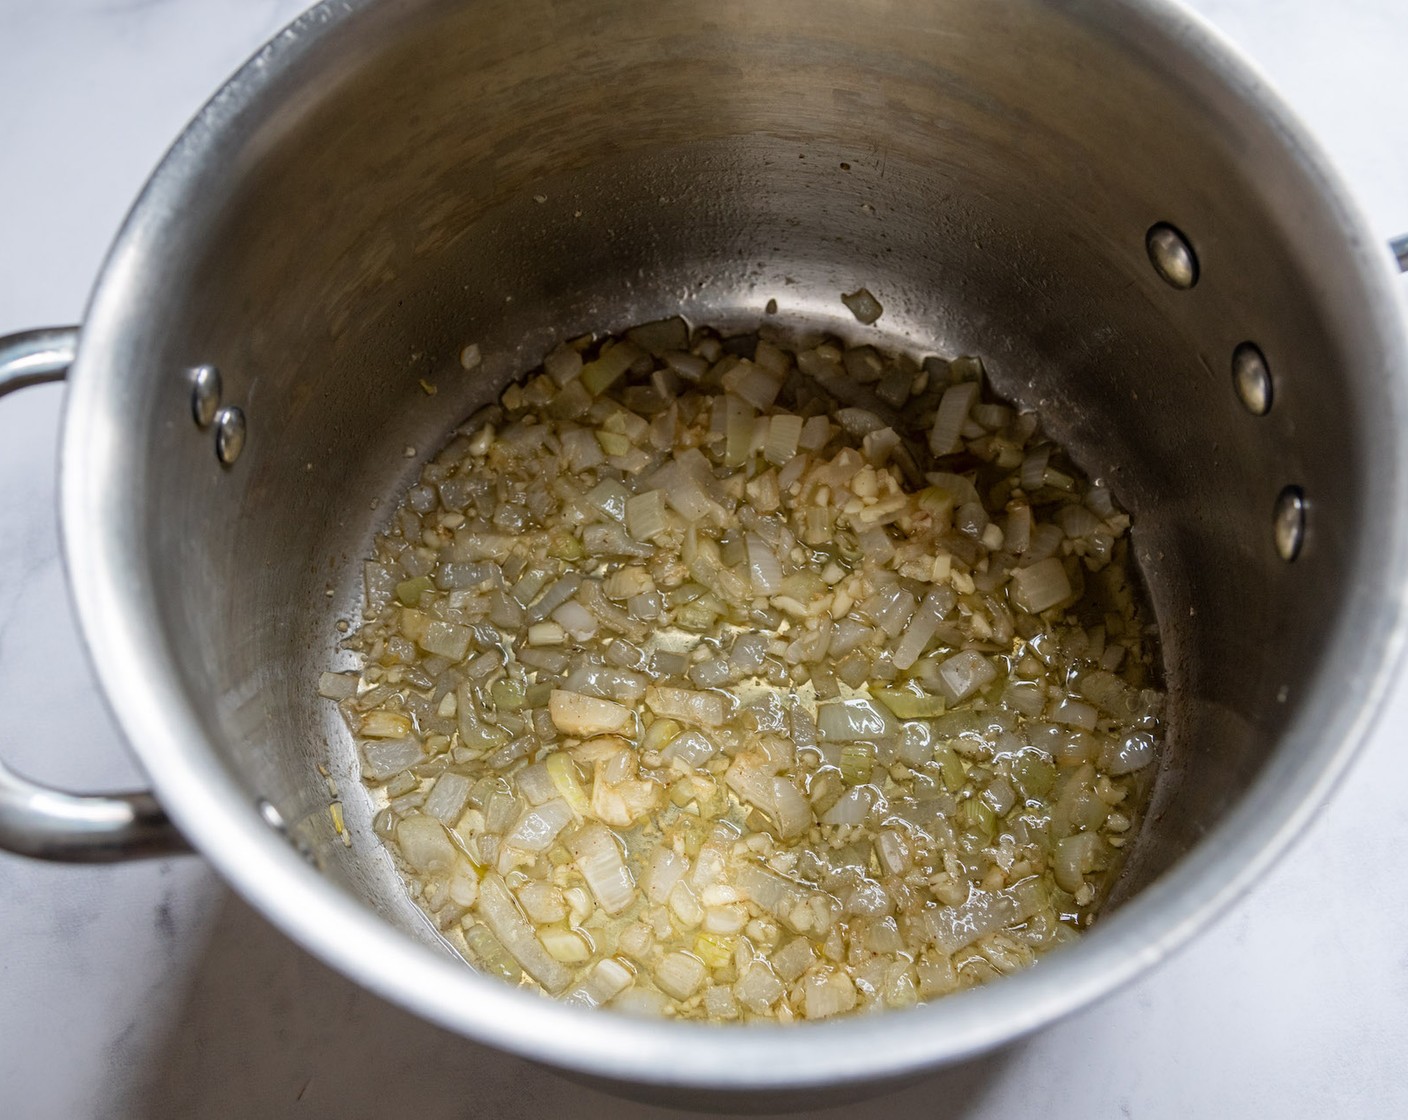 step 1 In a large saucepan, melt the Unsalted Butter (1/4 cup) over medium heat. Add the Onion (1) and cook for 3 minutes, or until translucent. Stir in the Garlic (3 cloves) and sauté for 30 seconds longer.